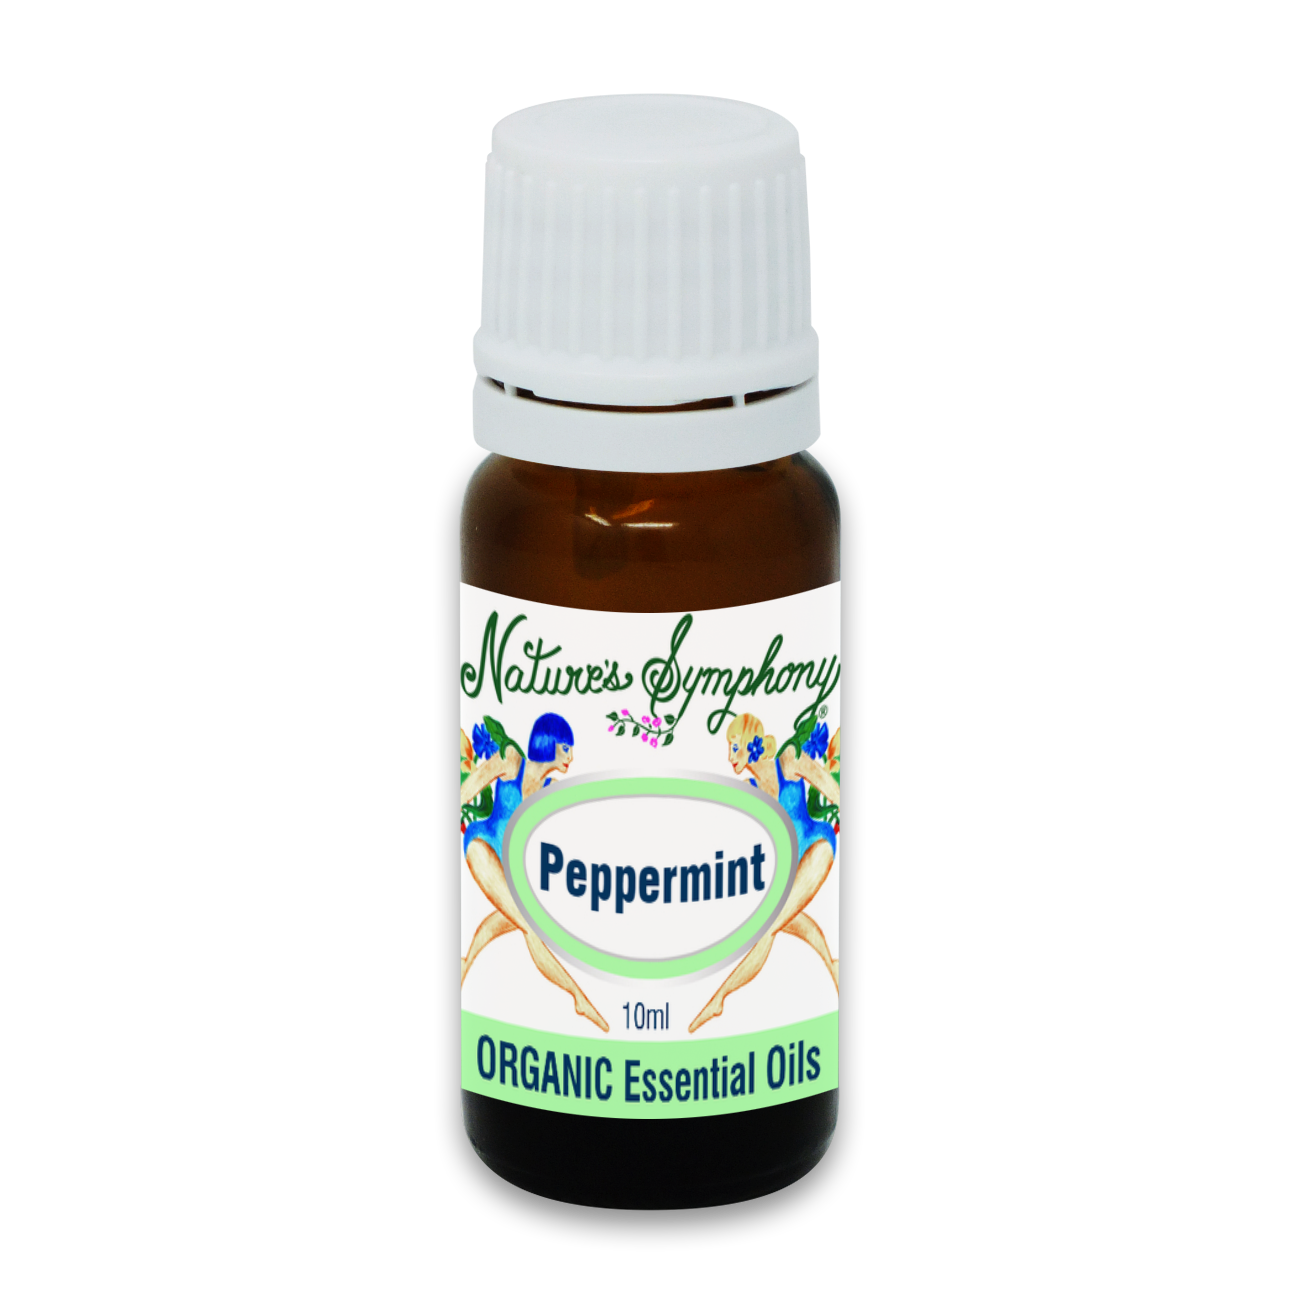 Peppermint, Organic/Wildcrafted oil - 10ml